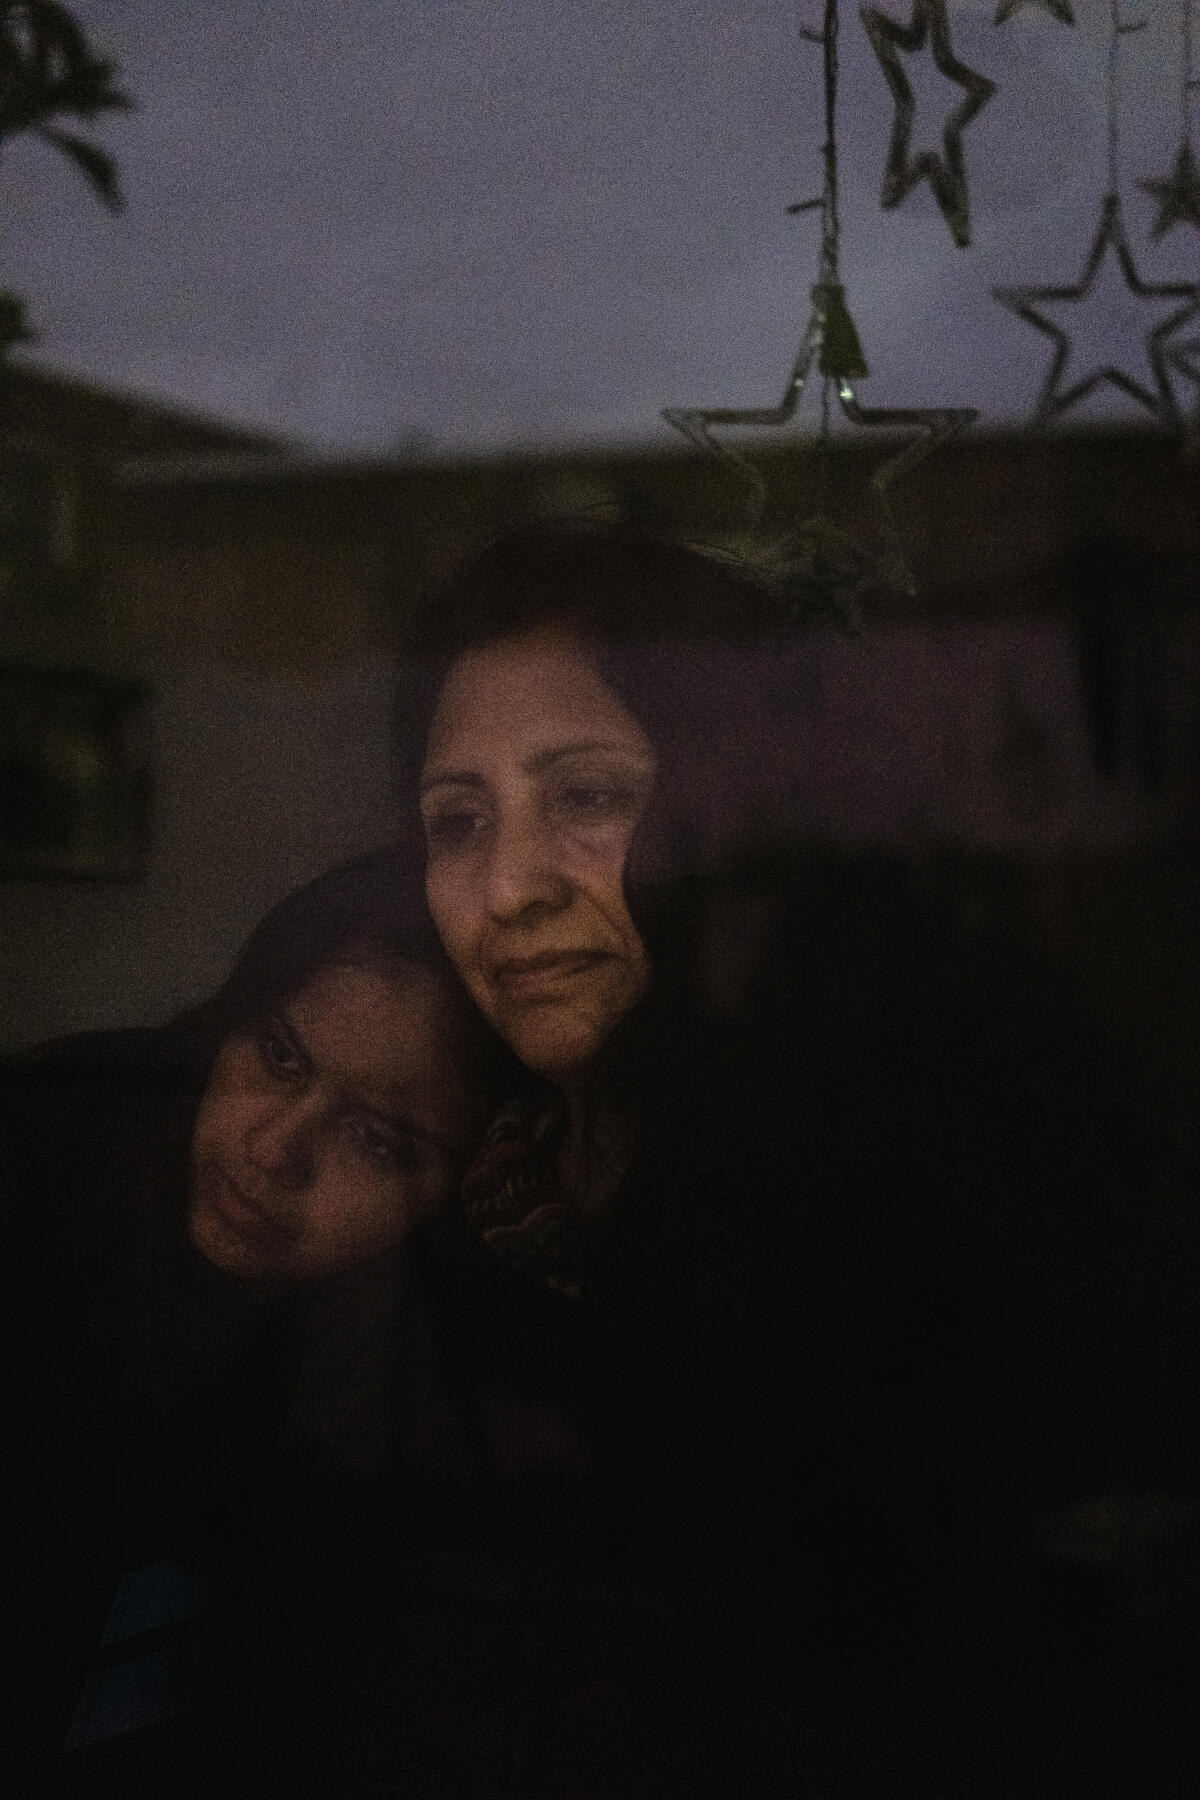 Belen Jimenez, who suffered from poisoning, and his mother, Maria Sarabia, in Puchuncavi (Chile), August 30, 2022.